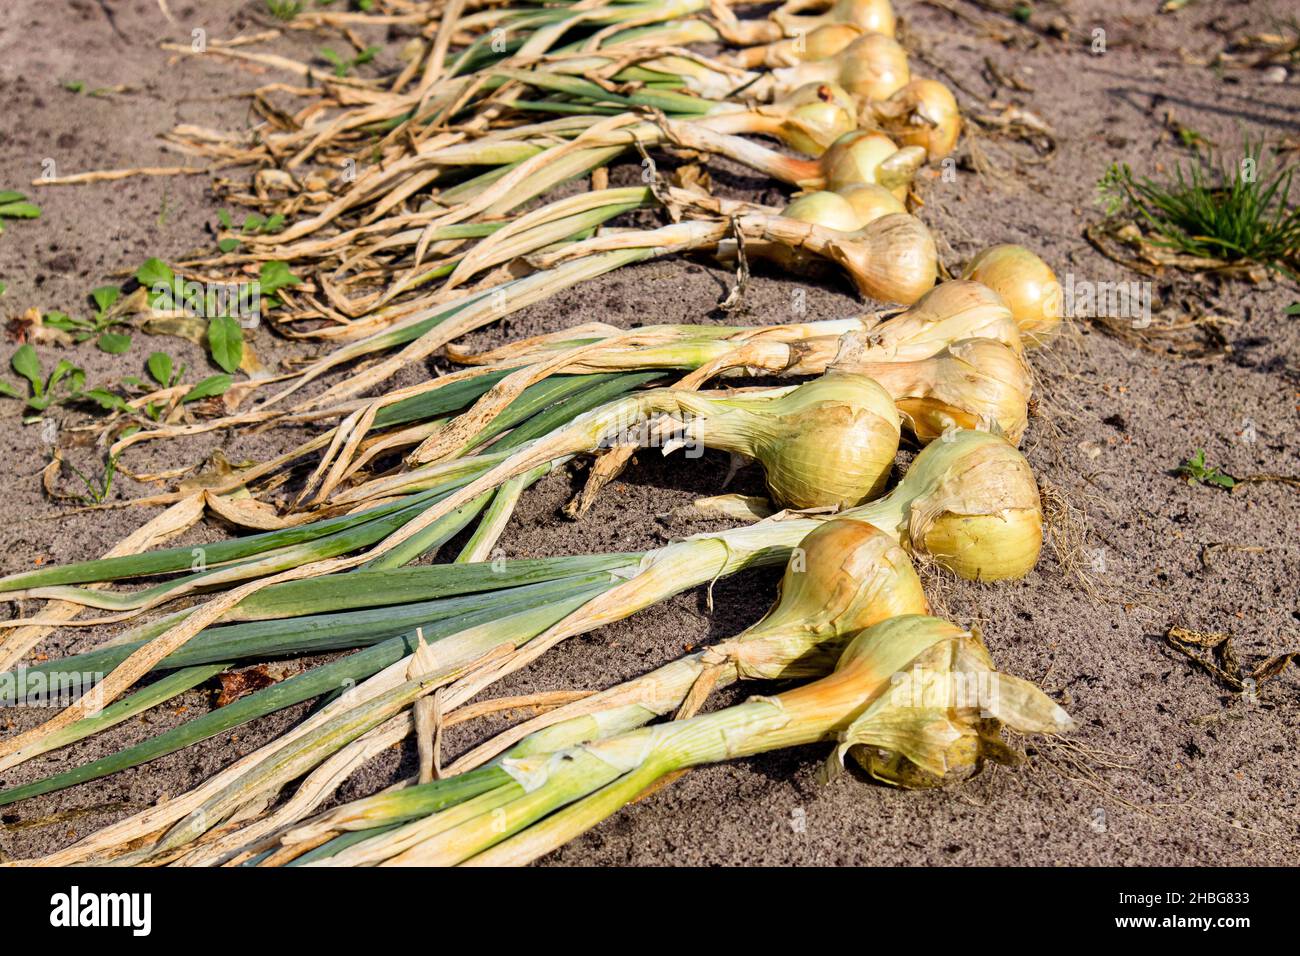 Freshly hand picked yellow onions Allium cepa dry in the sun on garden field in autumn, ready fro storing. Stock Photo